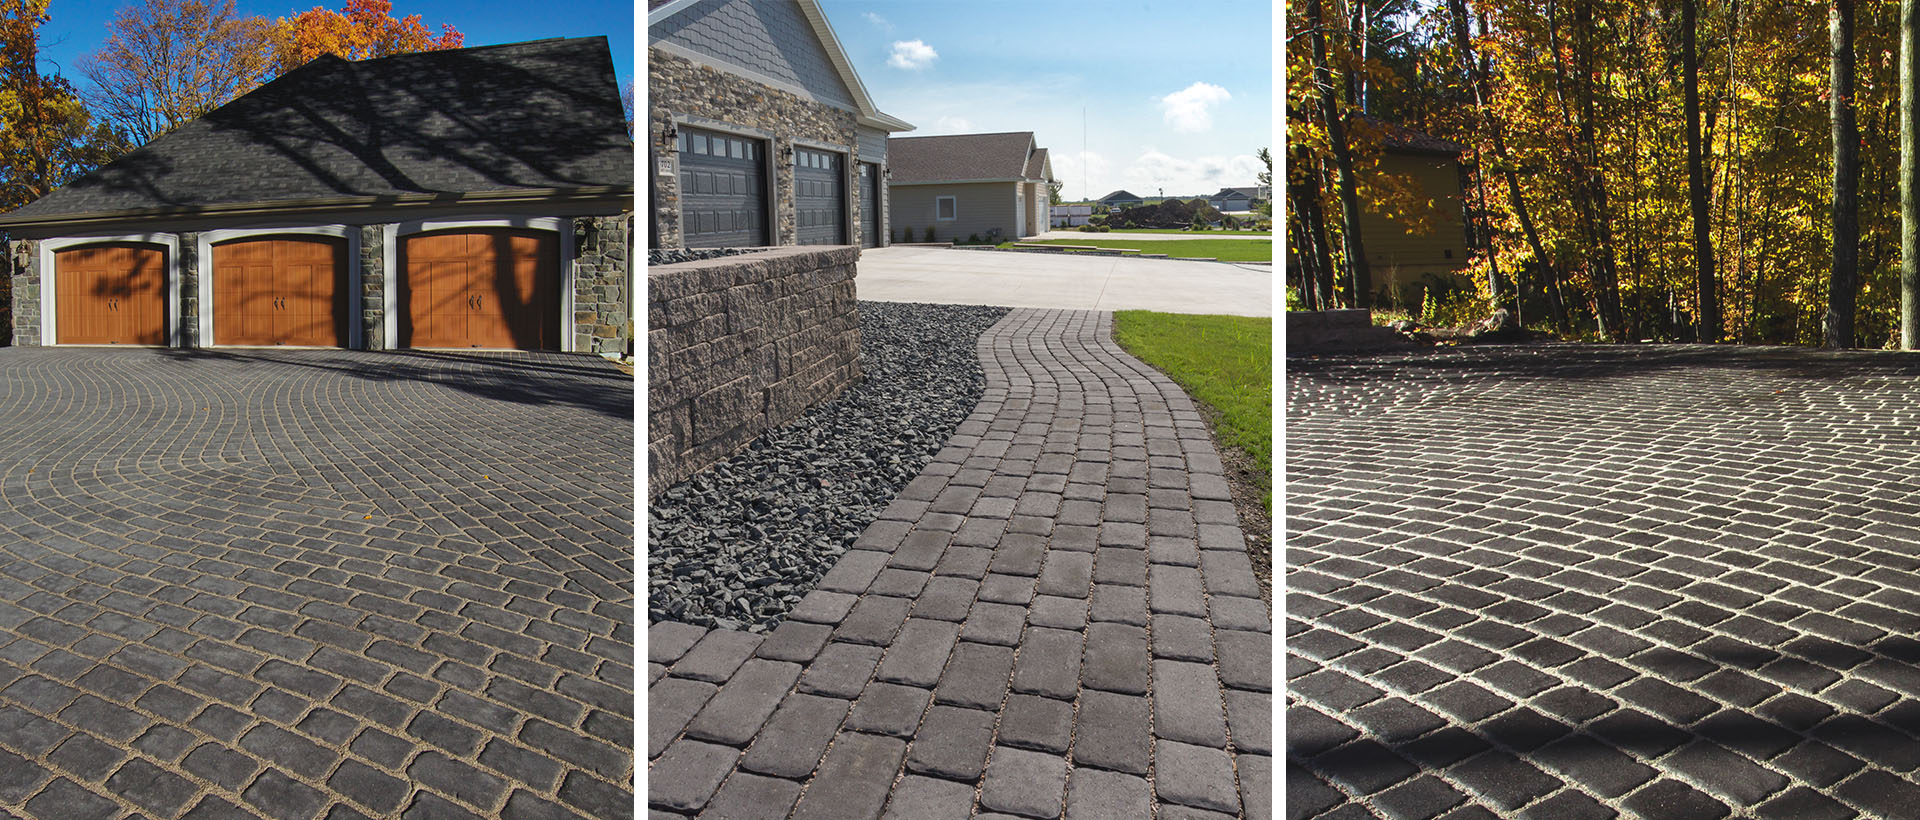 With its textured tops and irregular edges, Cobble Stone Pavers recreate the look of a centuries-old European boulevard. The open joint design makes it ideal for eco-friendly, permeable applications.